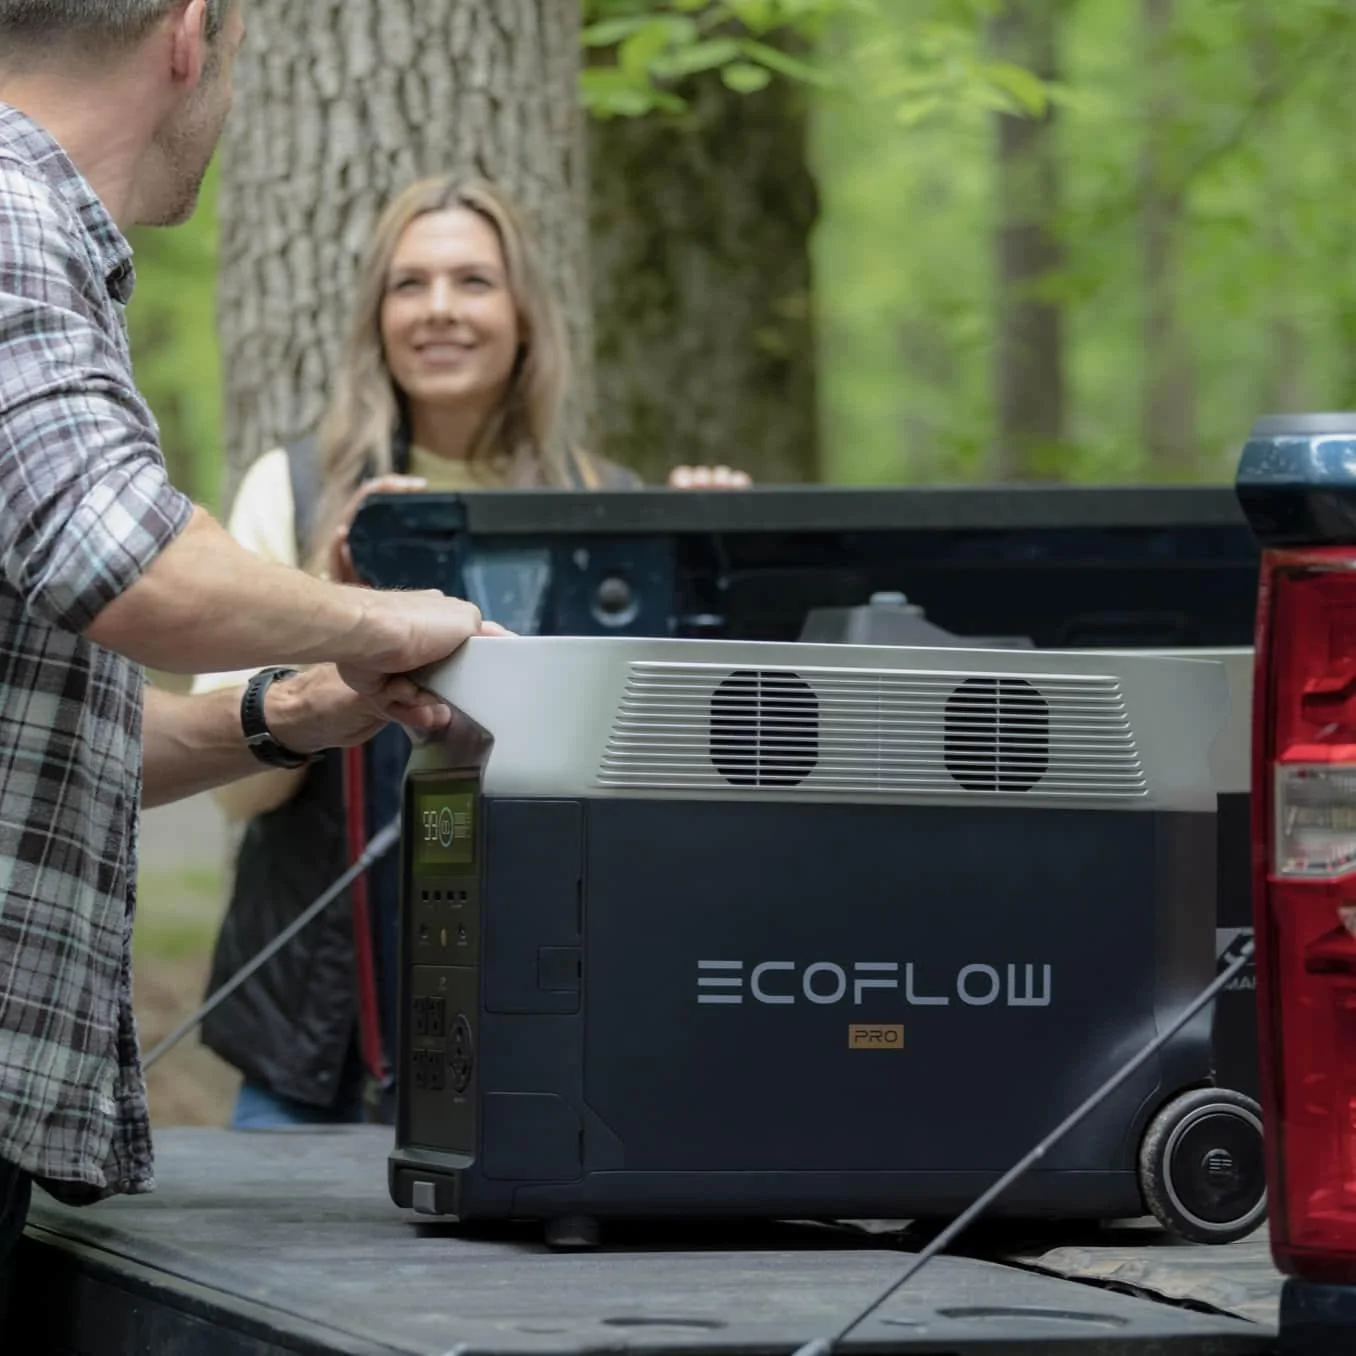 ECOFLOW DELTA Pro Portable Home Battery(LiFePO4), 3.6KWh Expandable Portable Power Station, Huge 3600W AC Output, Solar Generator (Solar Panel Not Included) For Home Backup, RV, Travel, Outdoor Camping